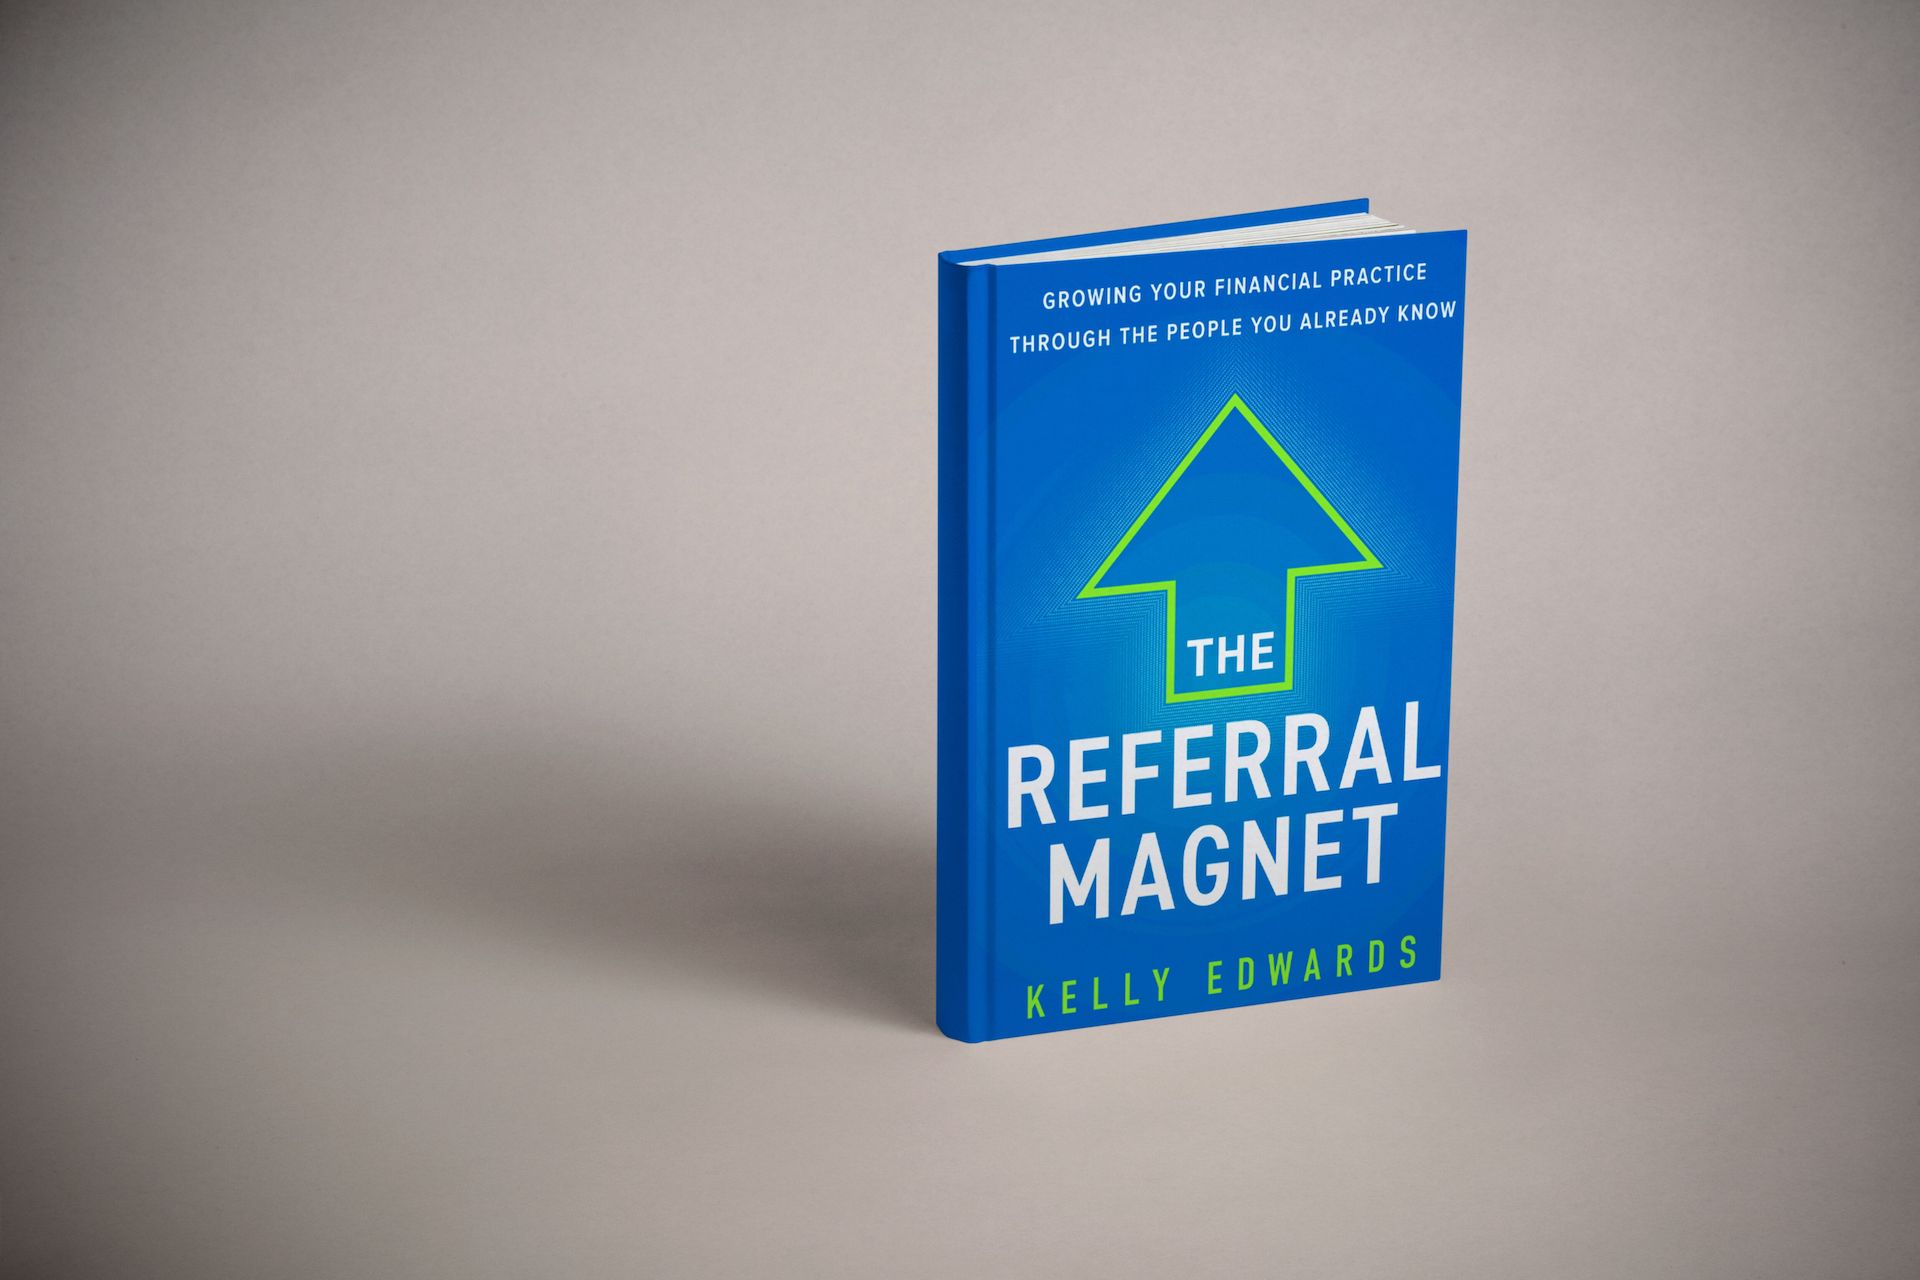 The Referral Magnet book cover